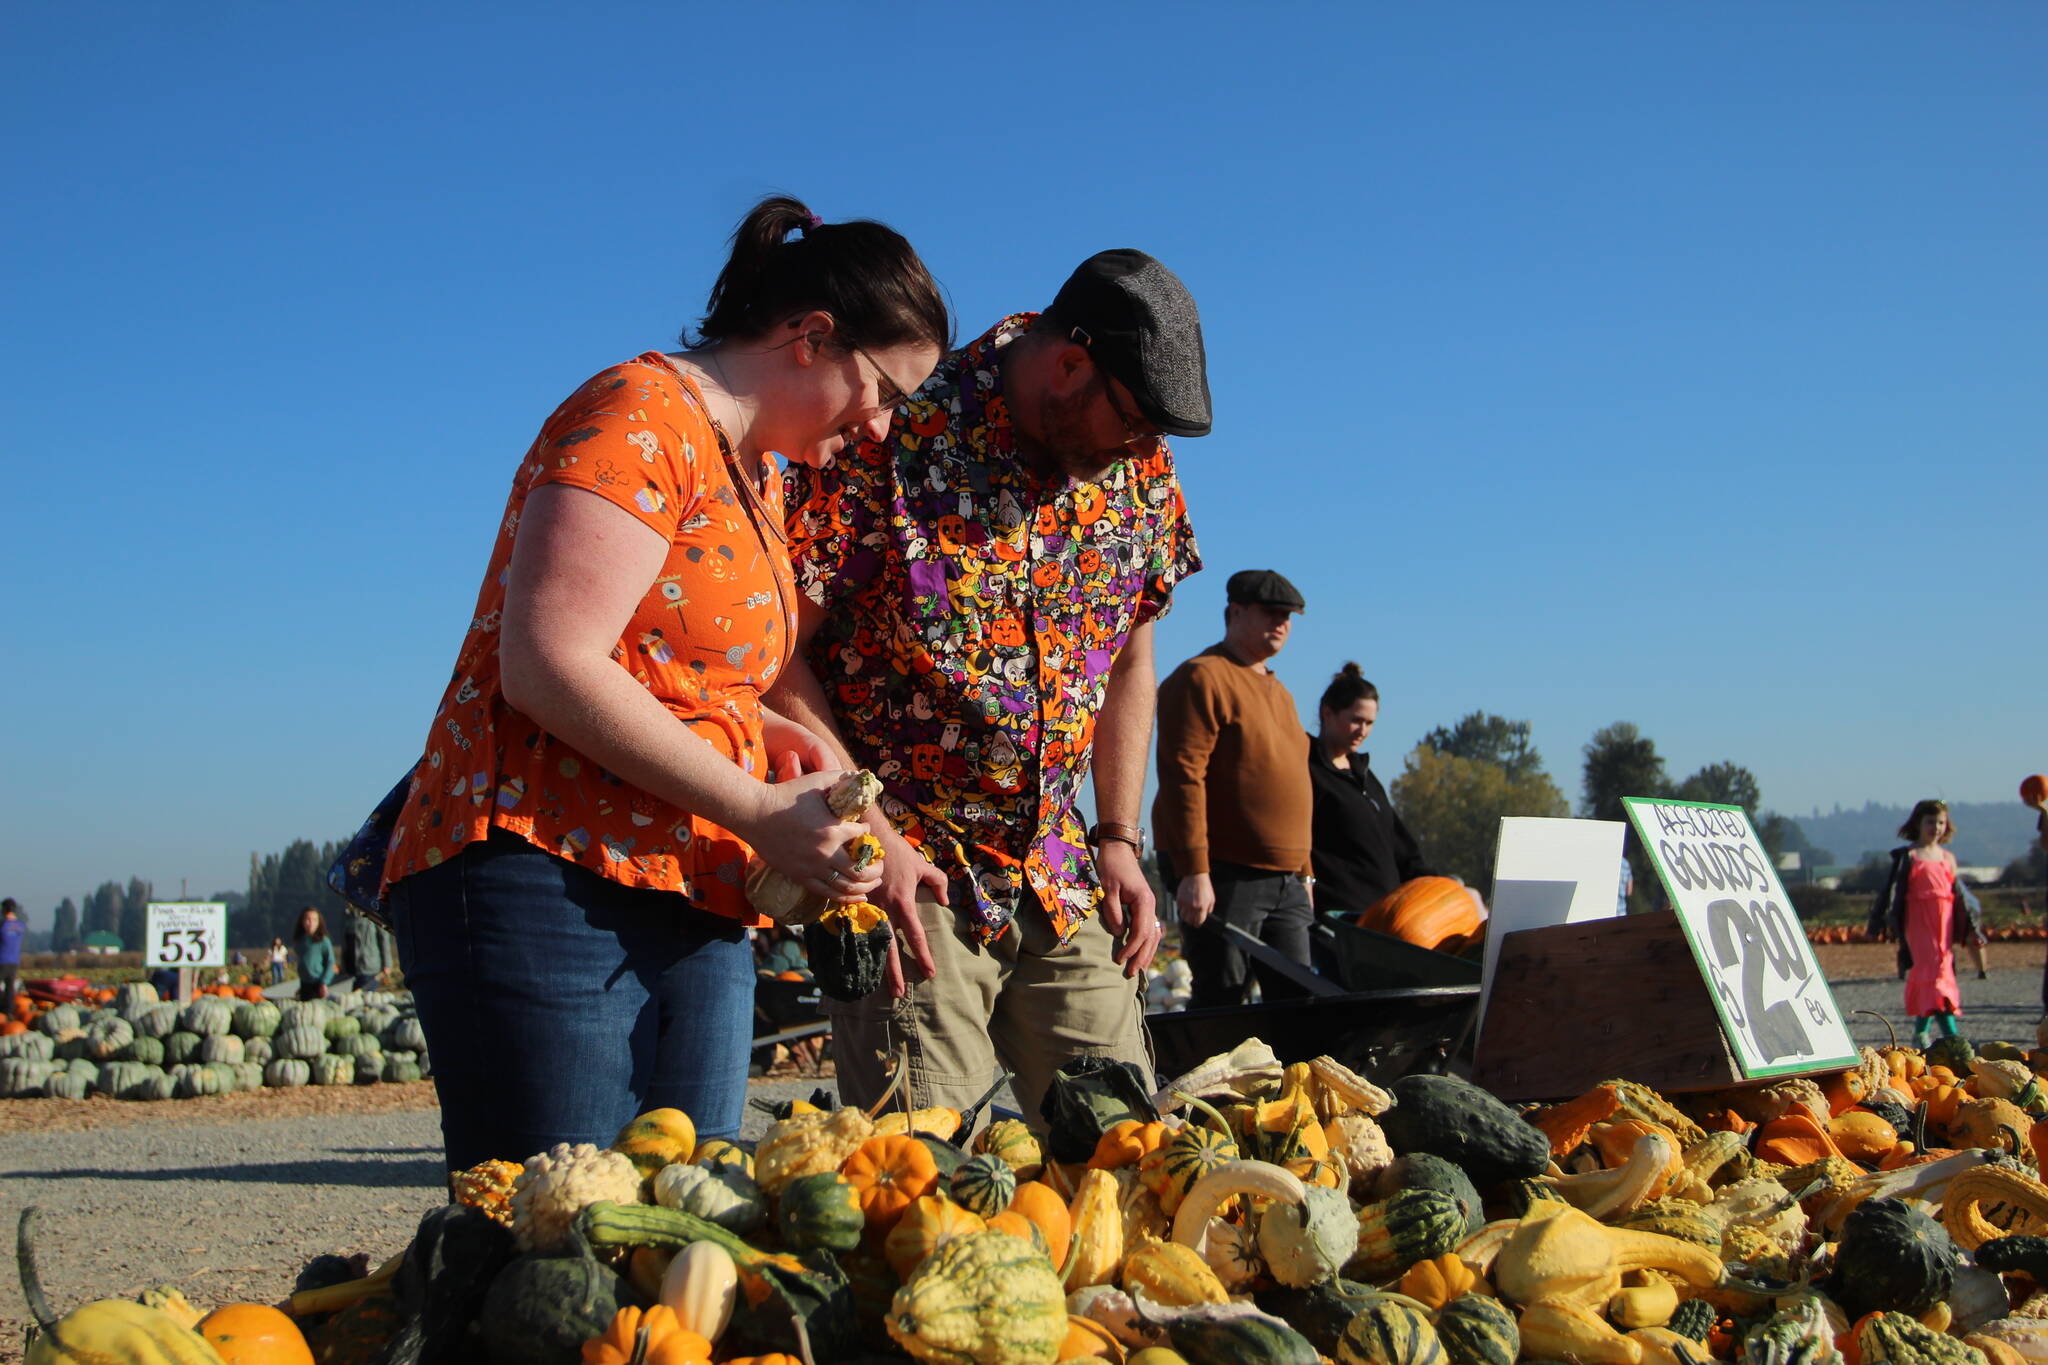 Cassandra and Scott Atkinson of Kent survey gourds on Oct. 16. They visit the Carpinitos’ pumpkin patch every year. Olivia Sullivan/Sound Publishing